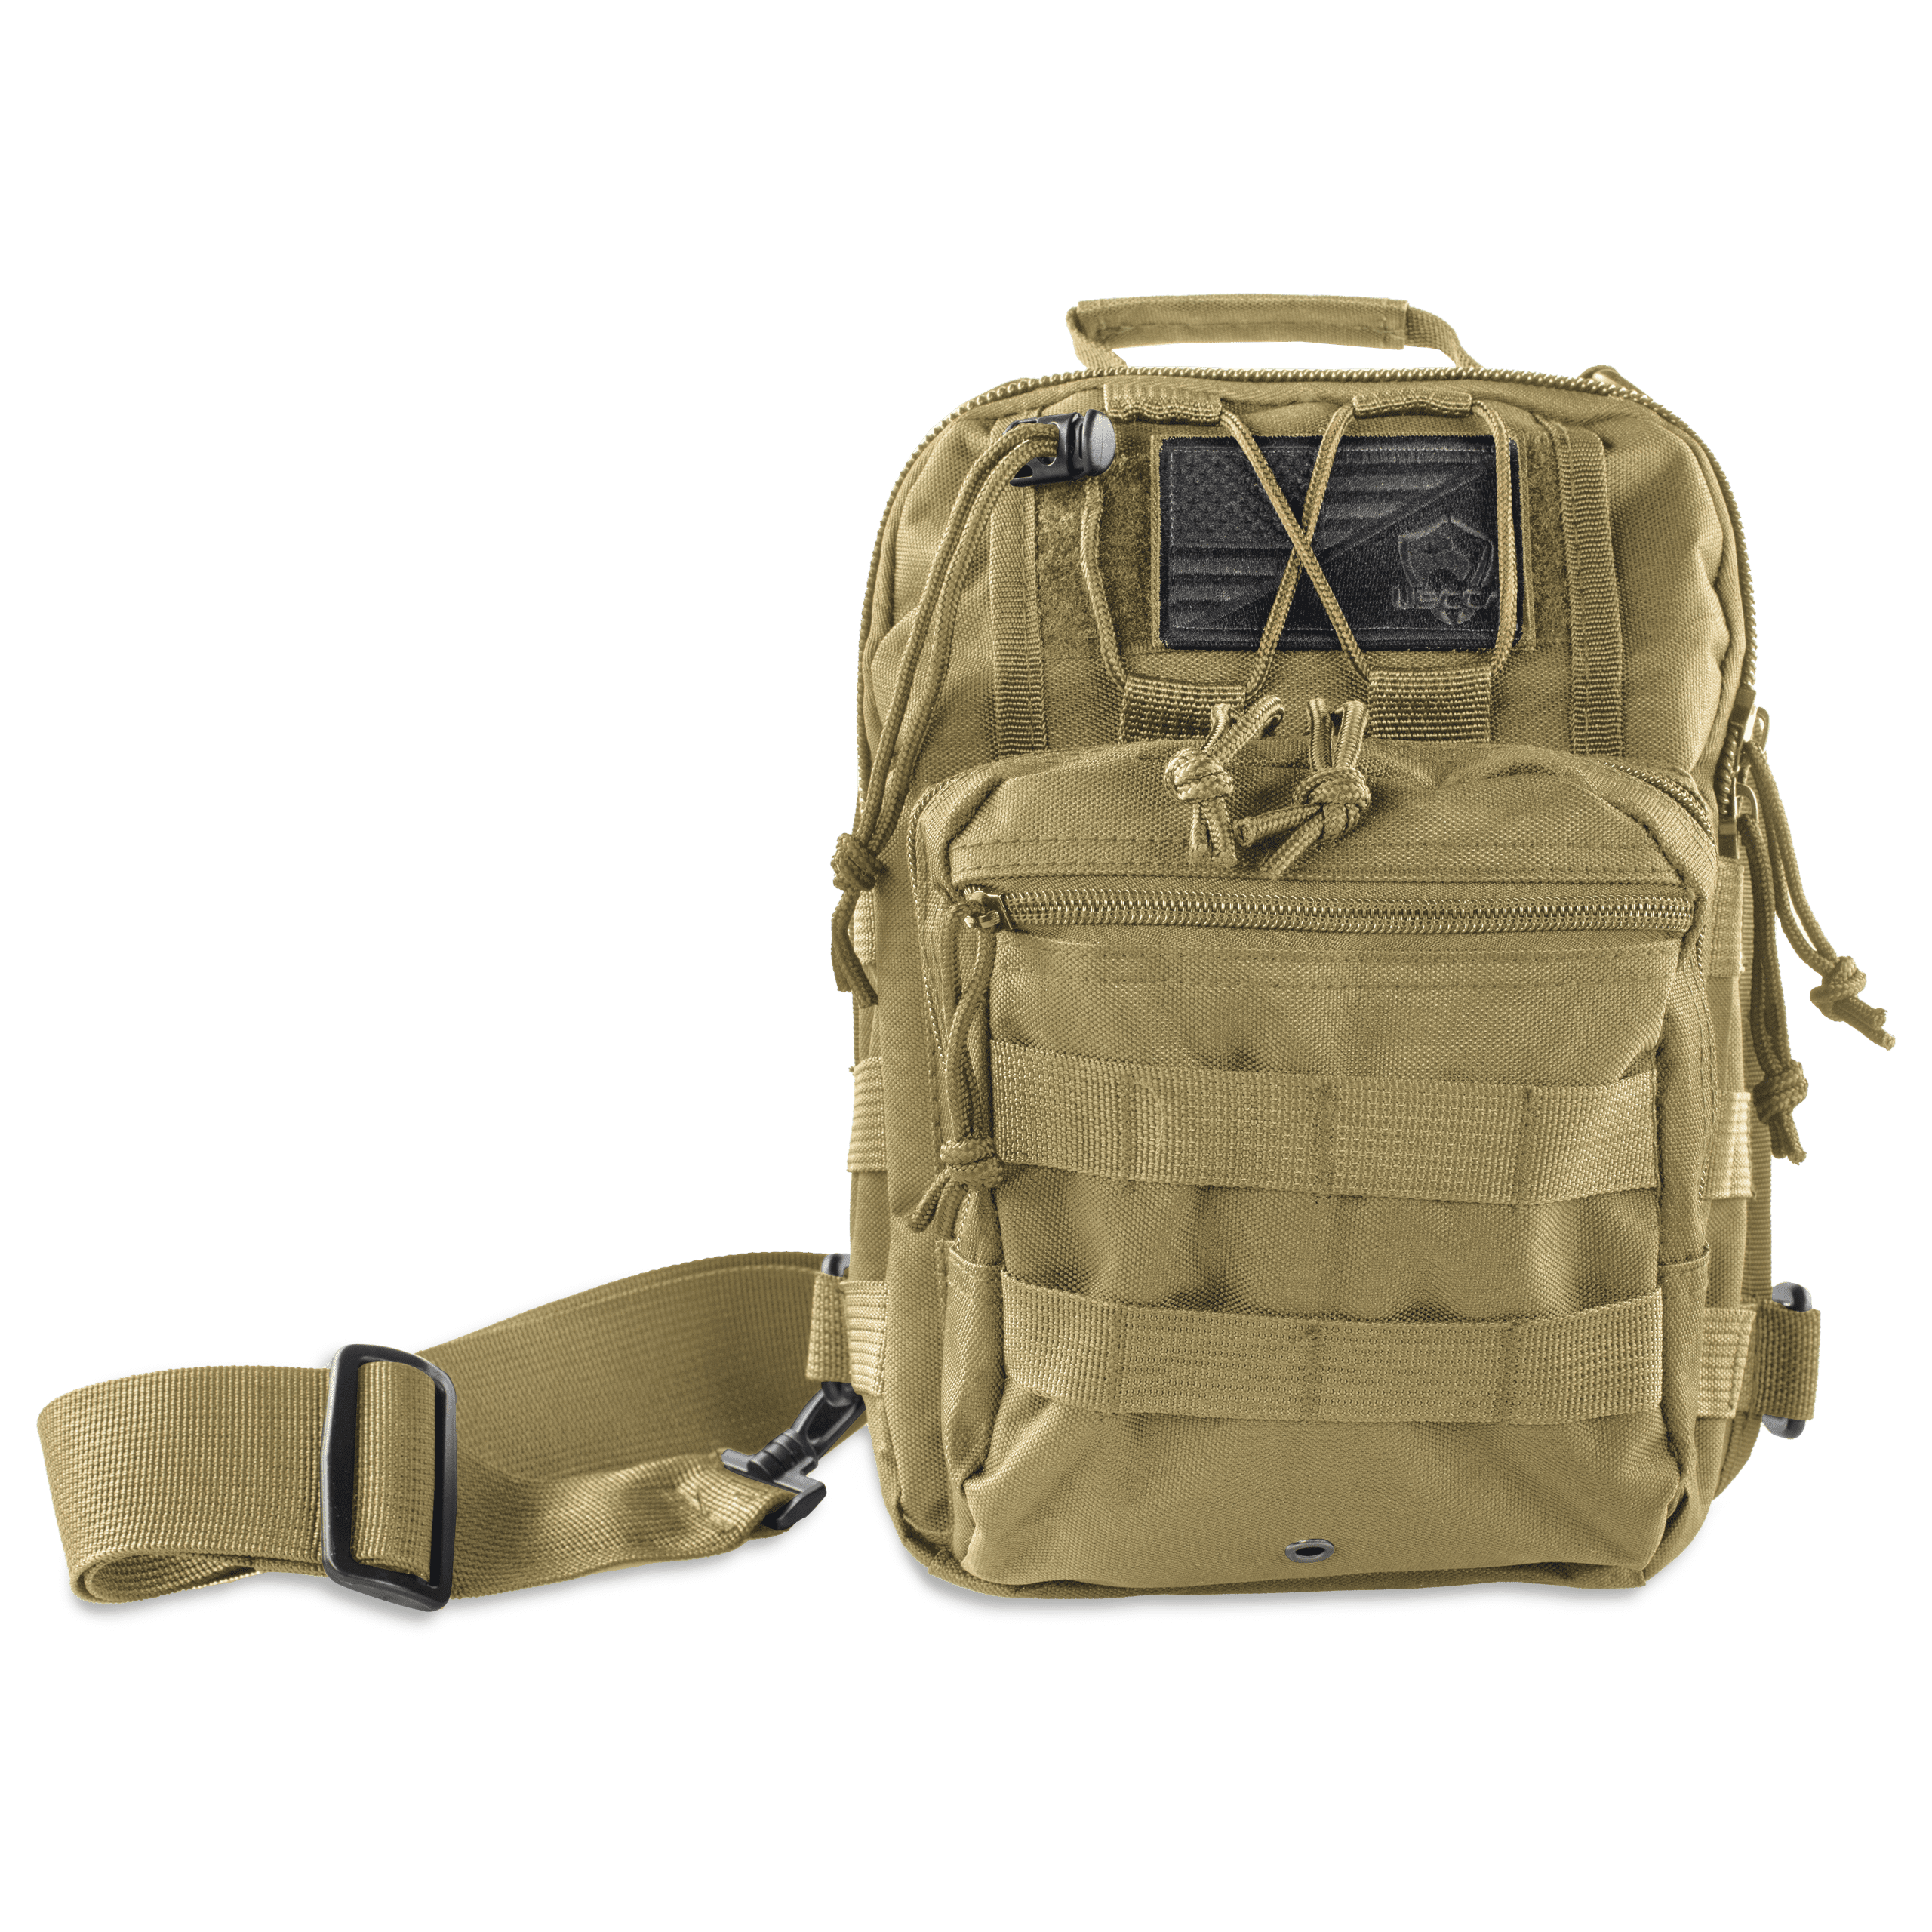 Molle Patch Panel Molle System Attachment Patch Holder for Backpack Clothing